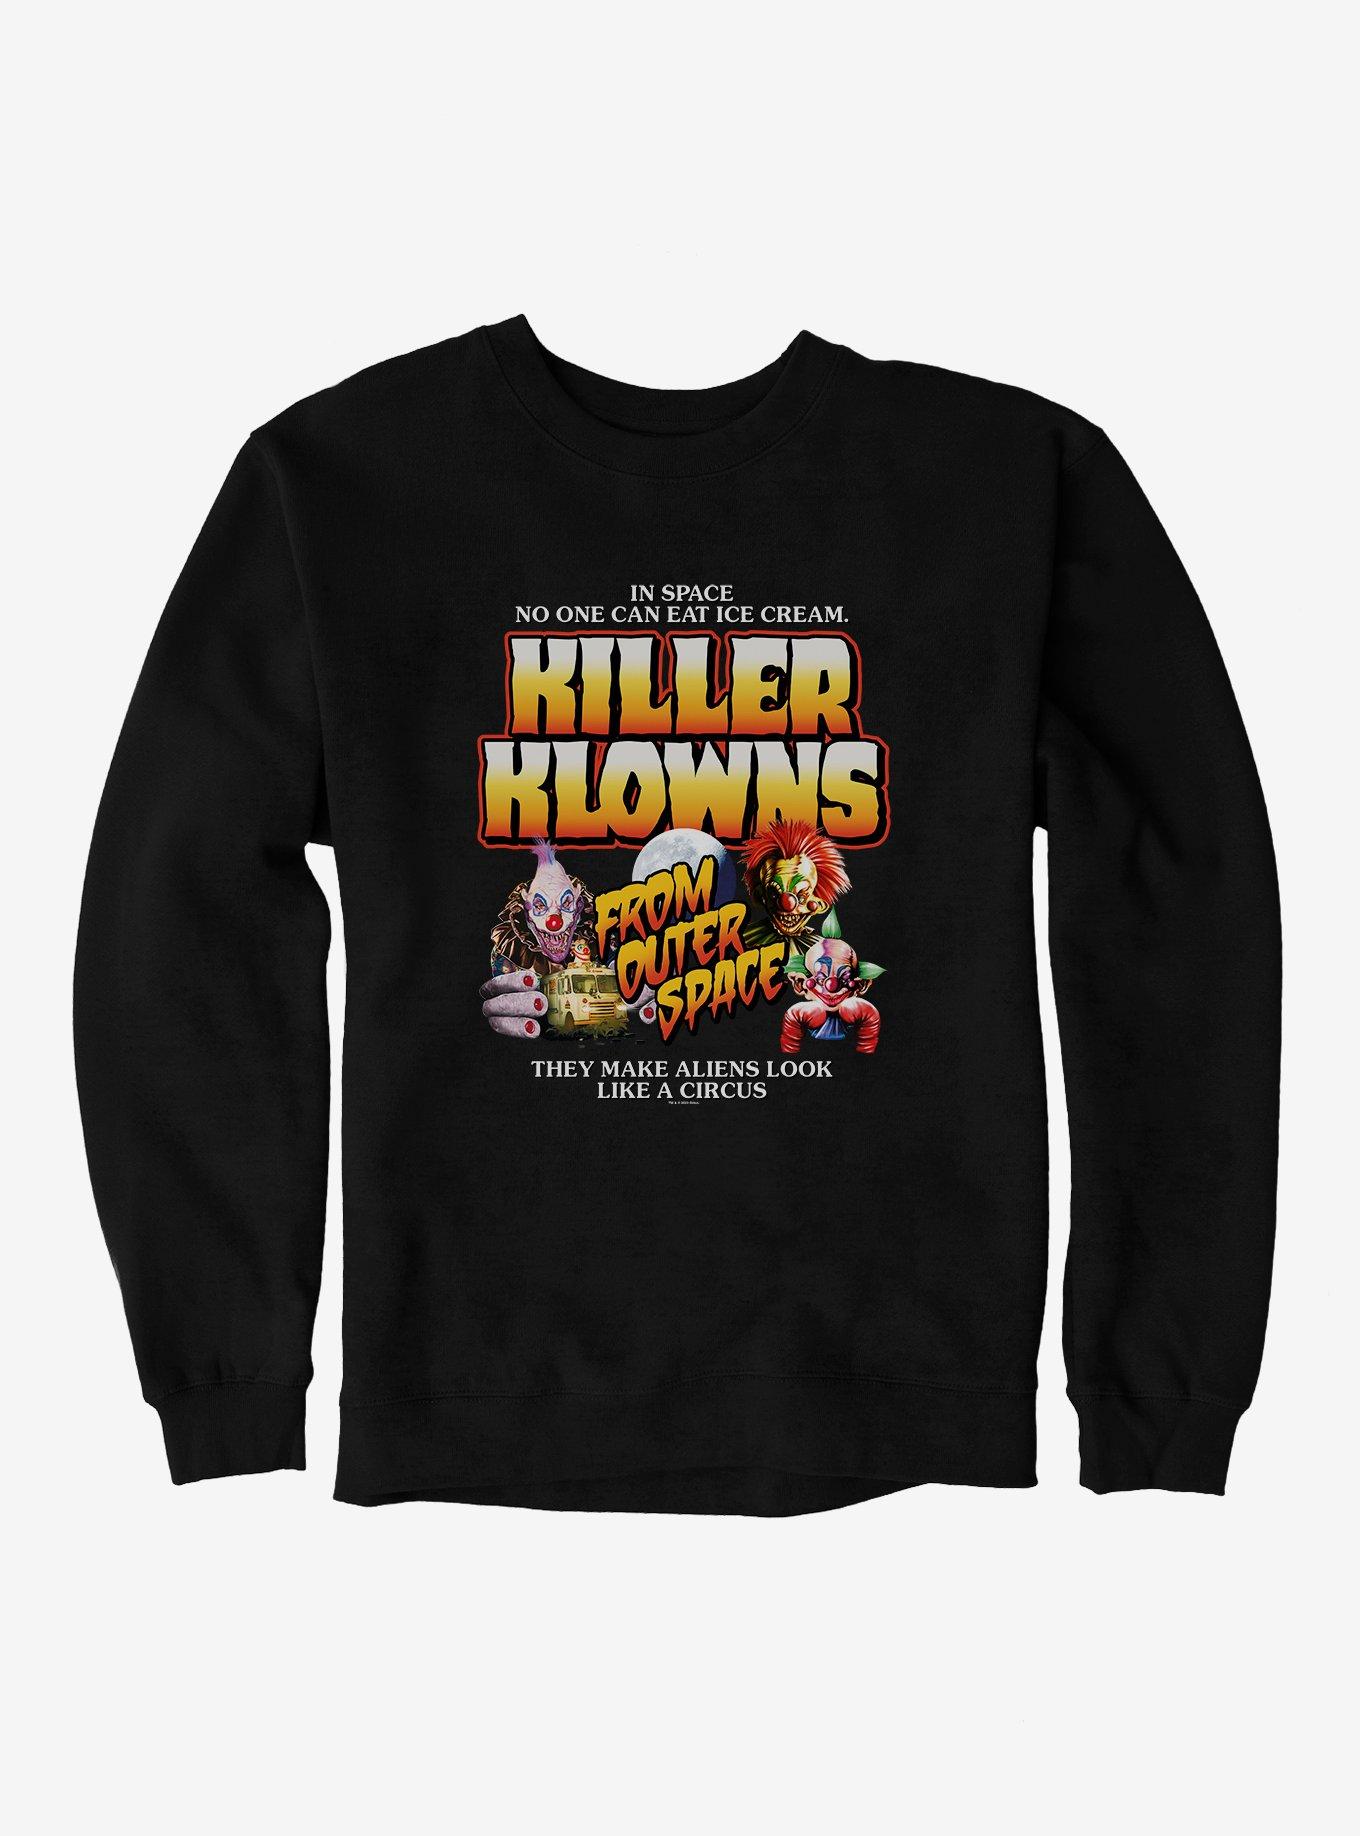 Killer Klowns From Outer Space No One Can Eat Ice Cream Sweatshirt